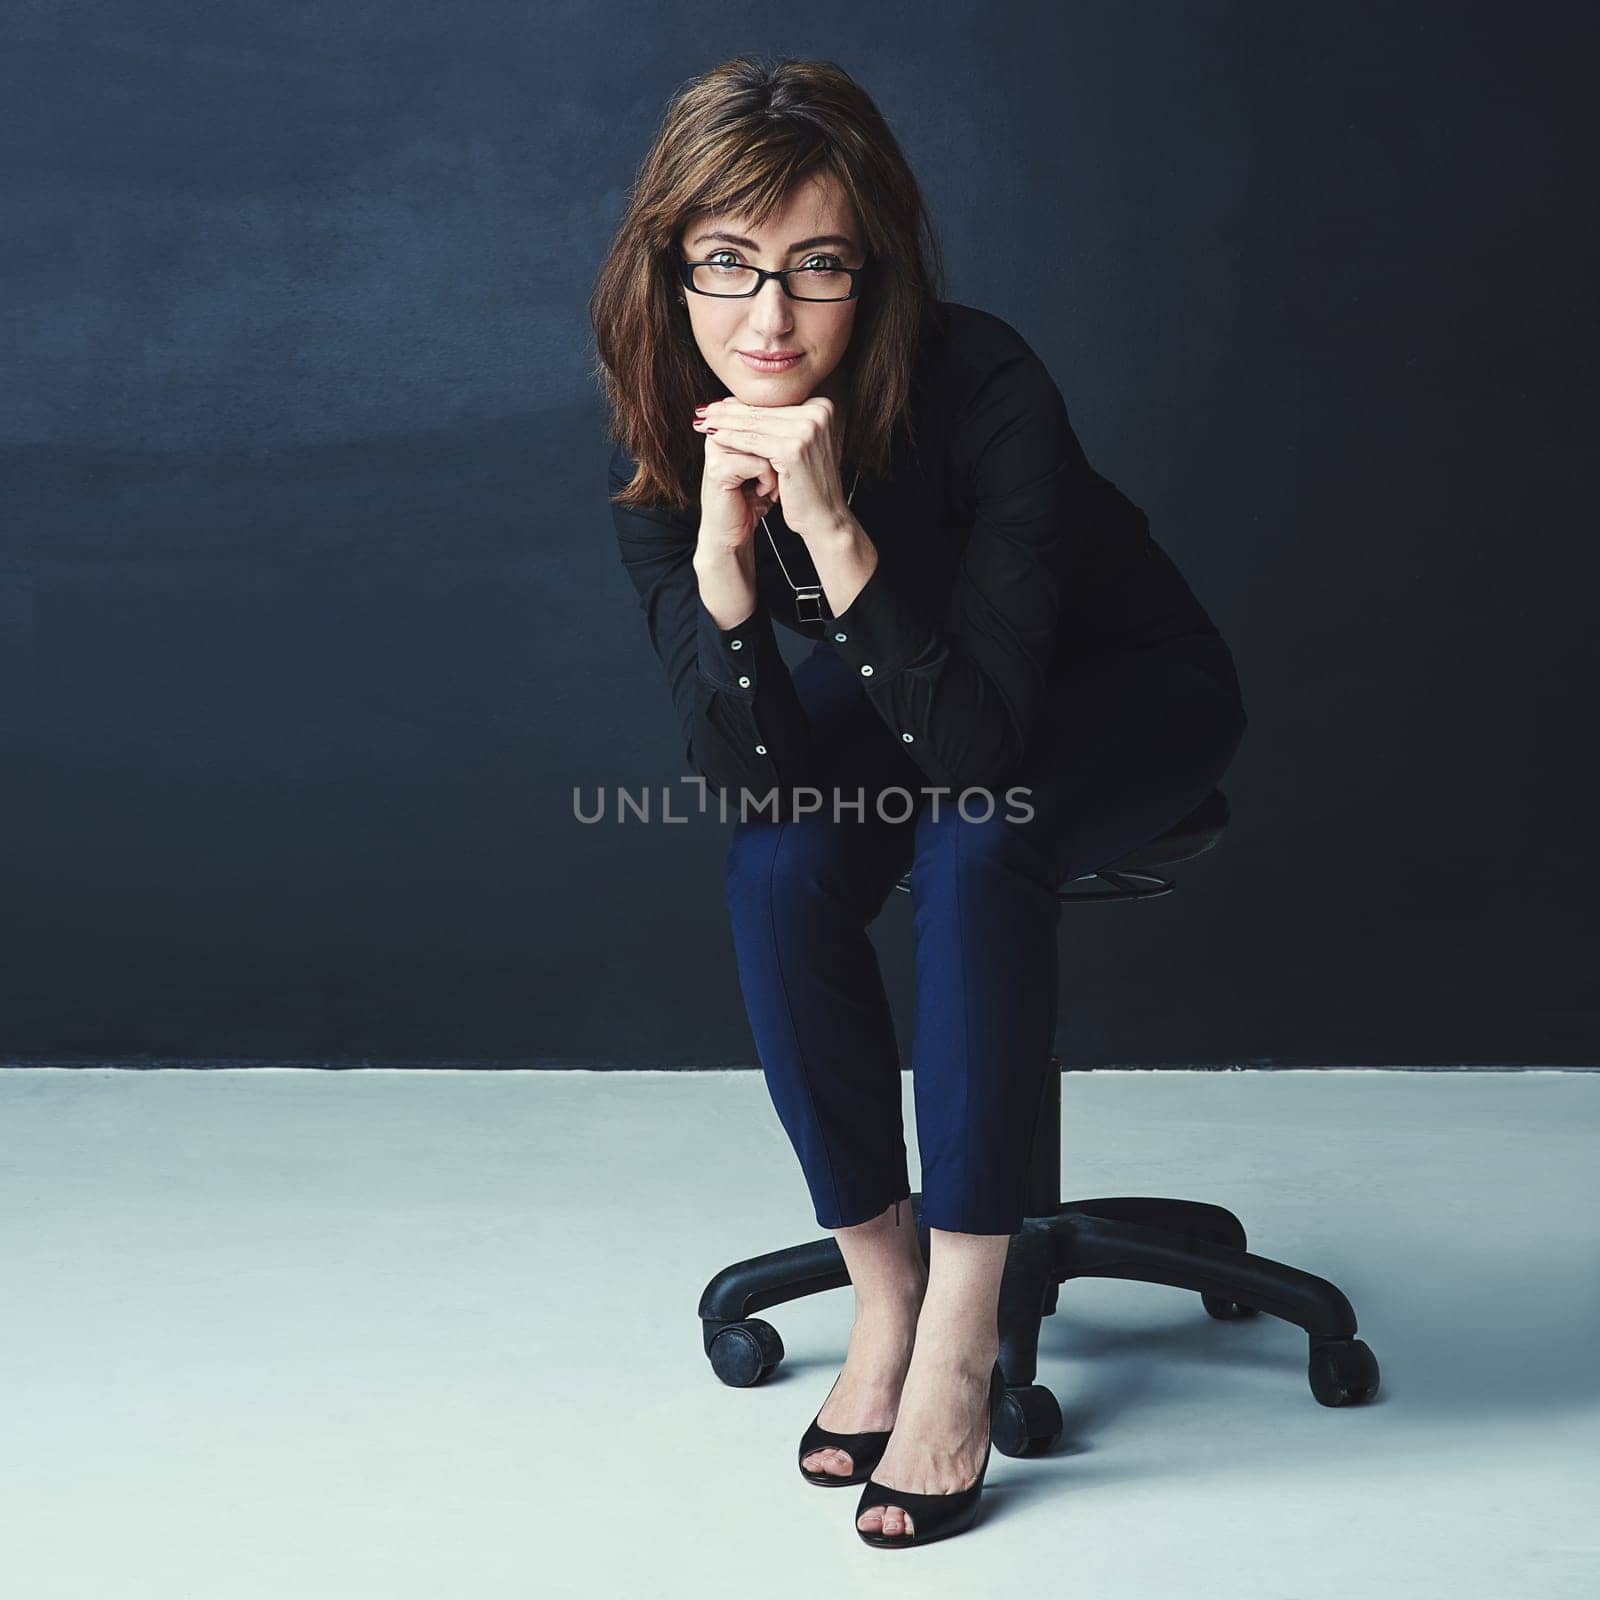 Forward-thinking is essential if you want to stay on top. Studio portrait of a corporate businesswoman posing against a dark background